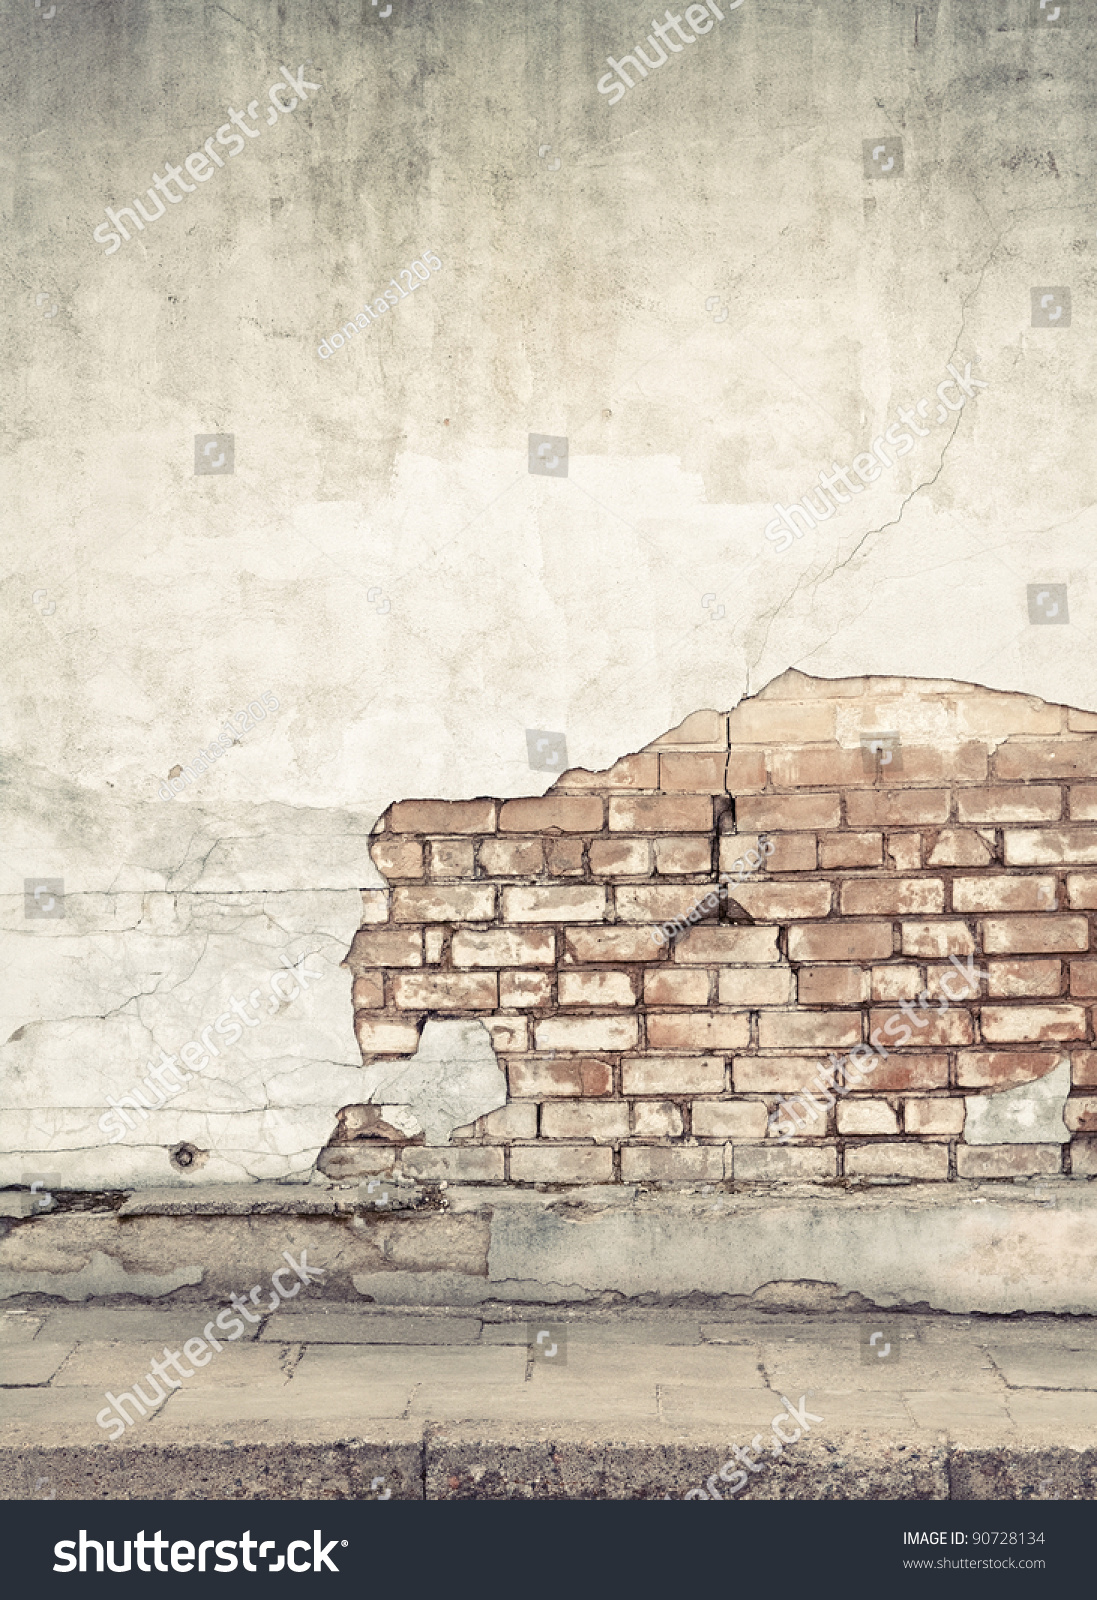 Aged Street Wall Background Texture Stock Photo Shutterstock